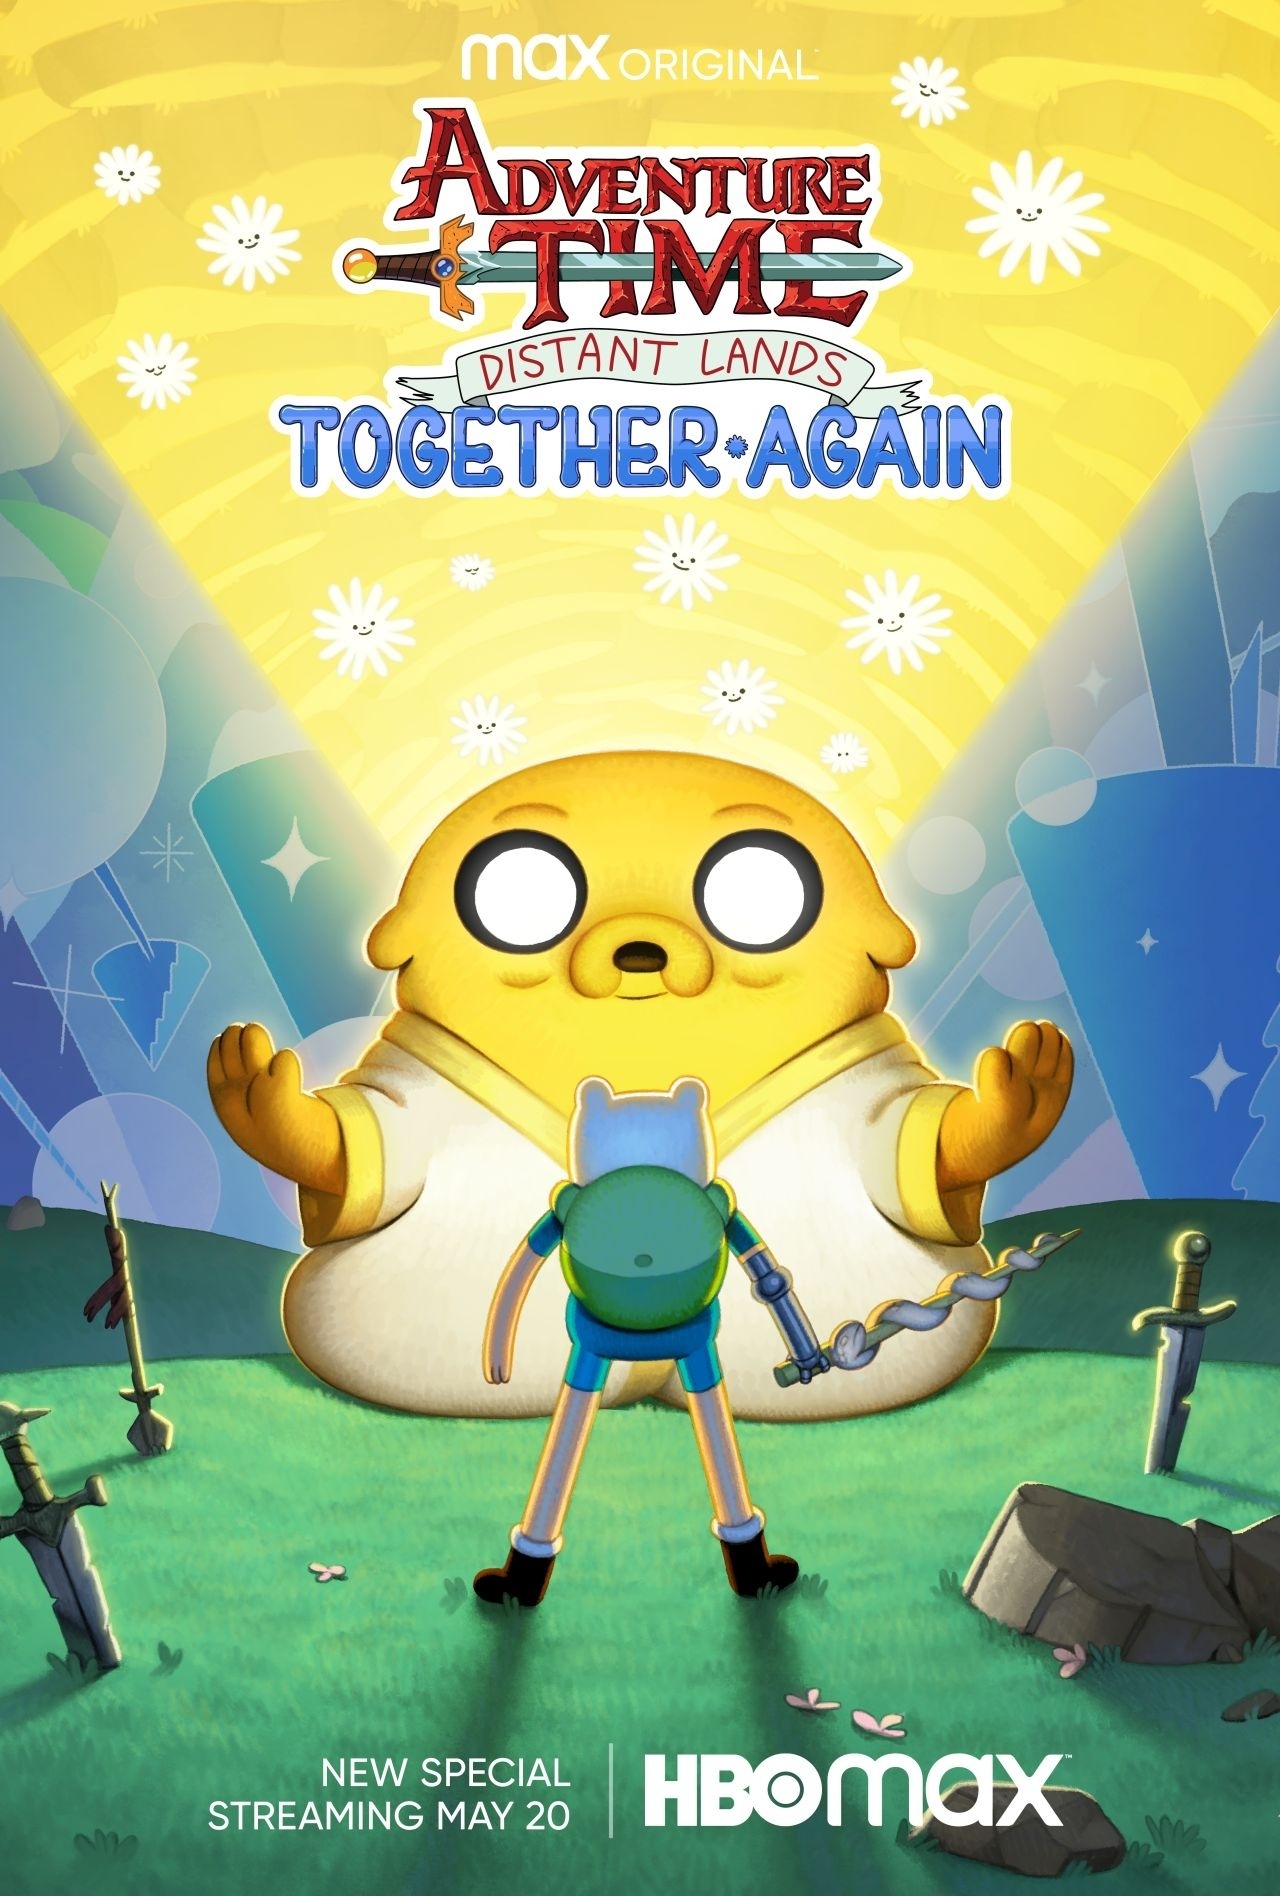 Now streaming on HBO Max … Adventure Time: Distant Lands - Together Again!